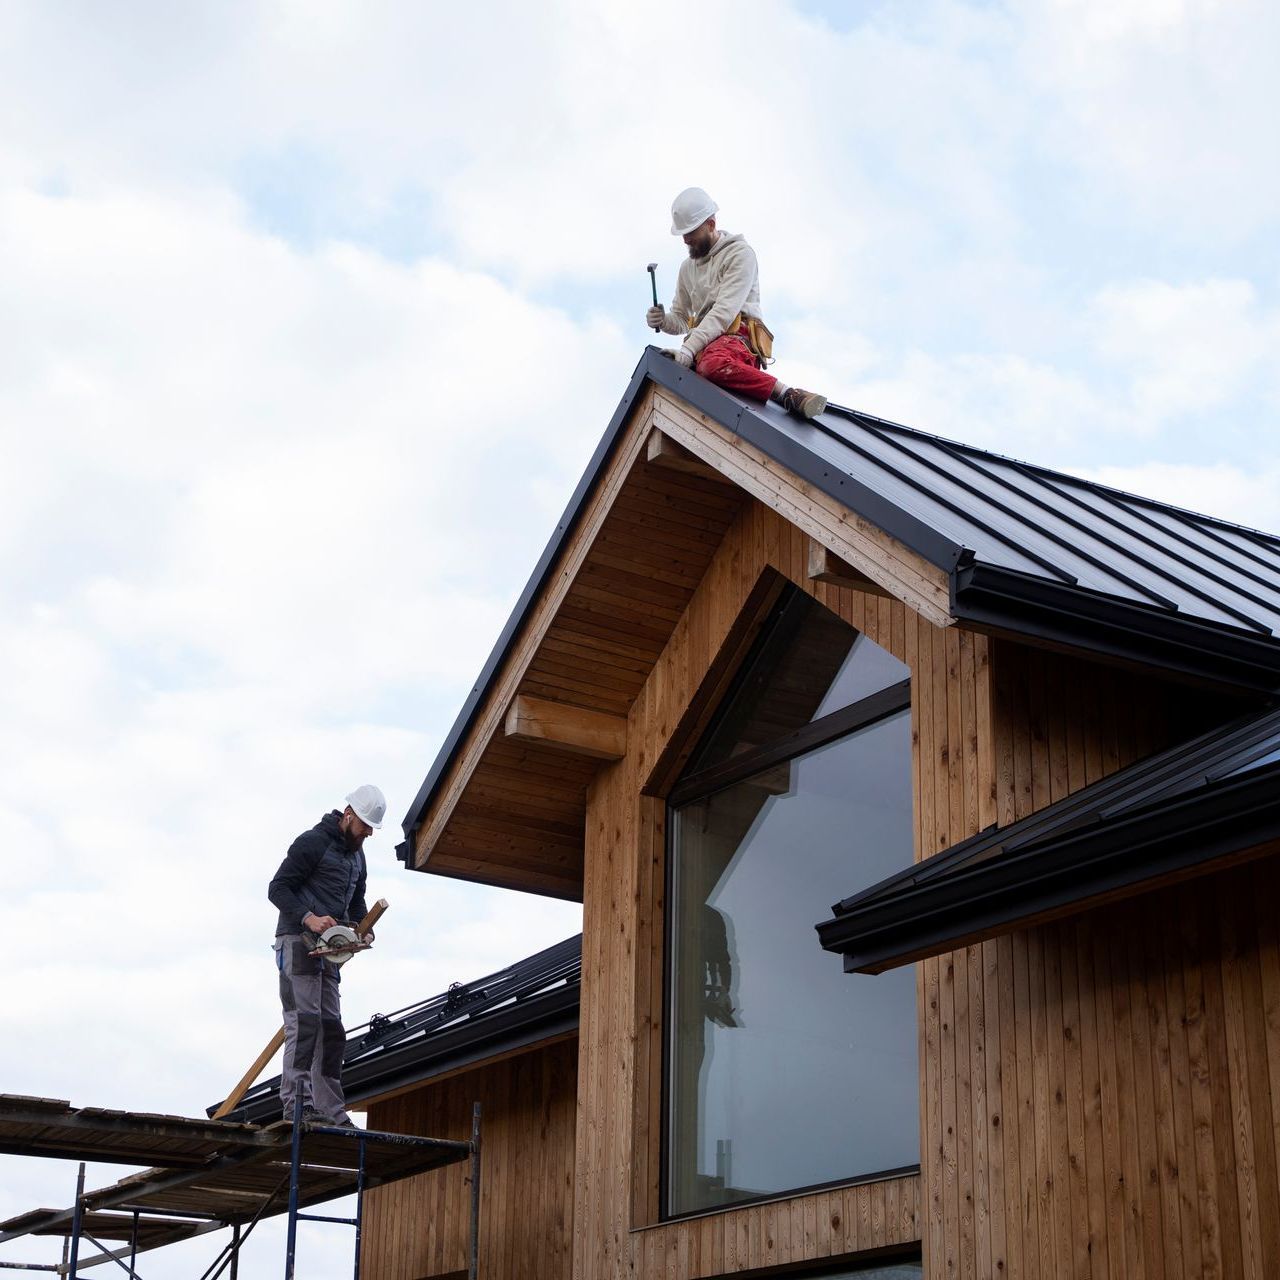 two men are working on the roof of a wooden house